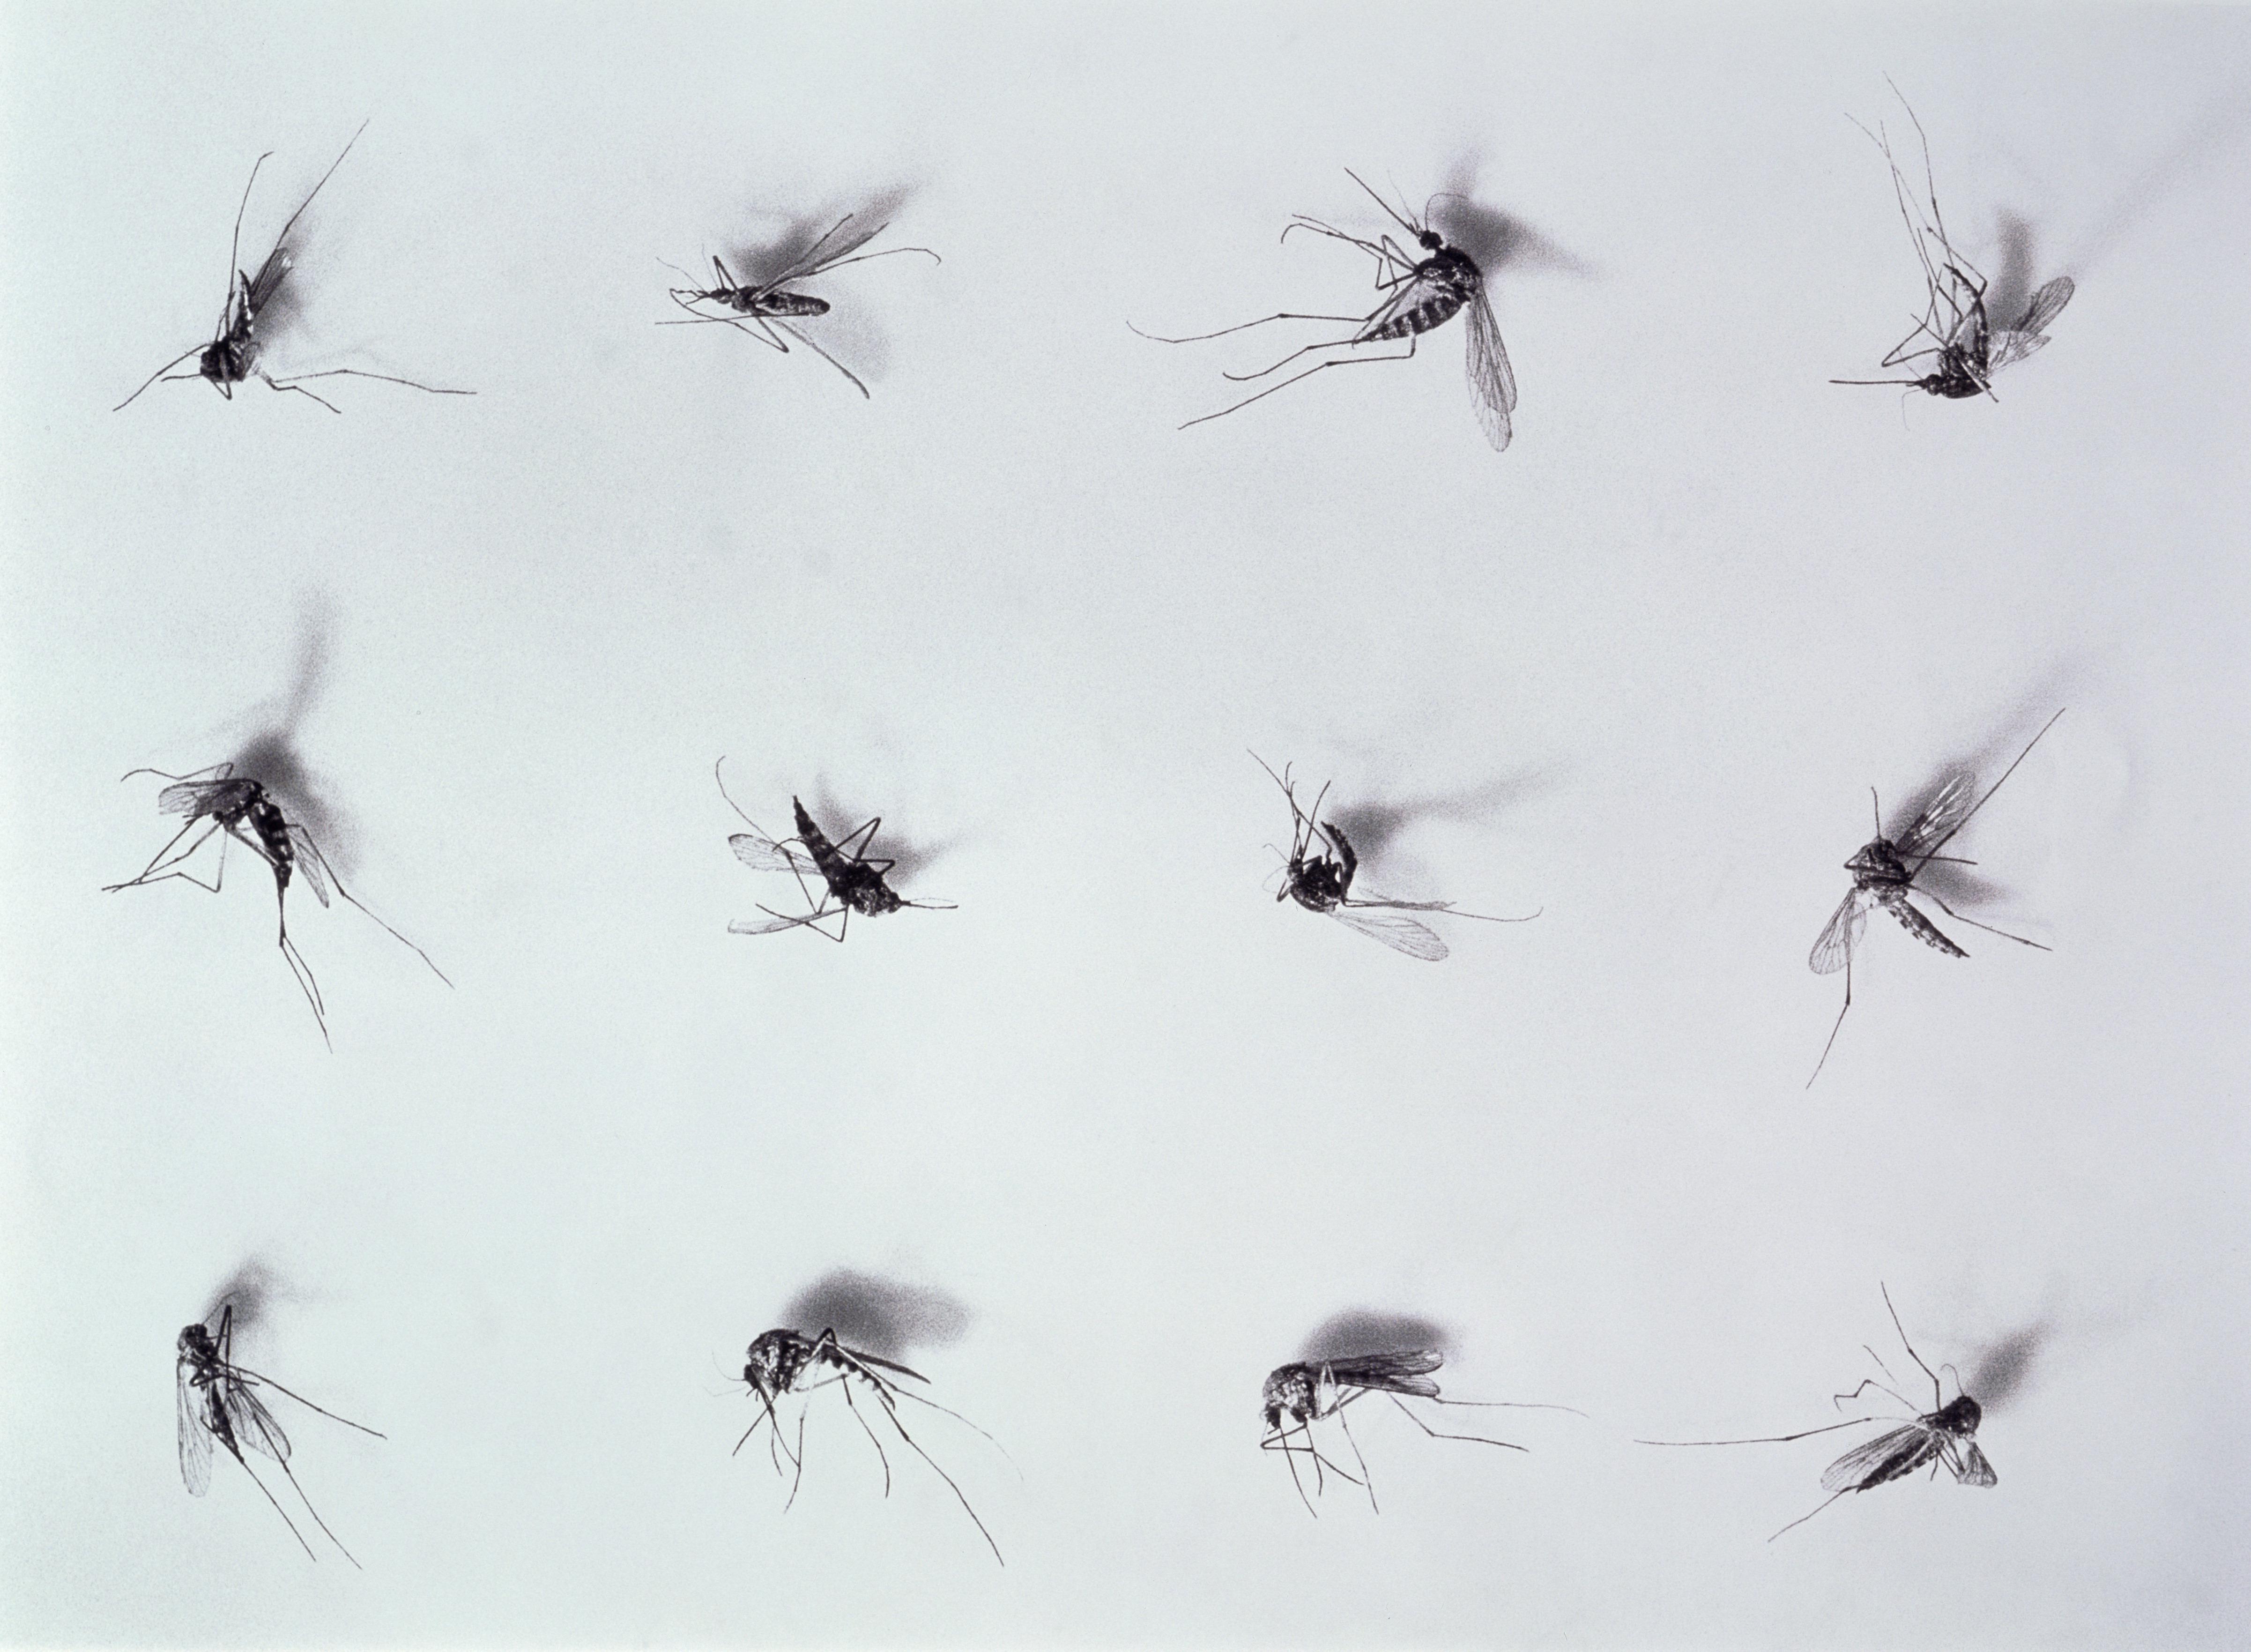 Dead mosquitoes (Culicidae) arranged in rows (B&W)